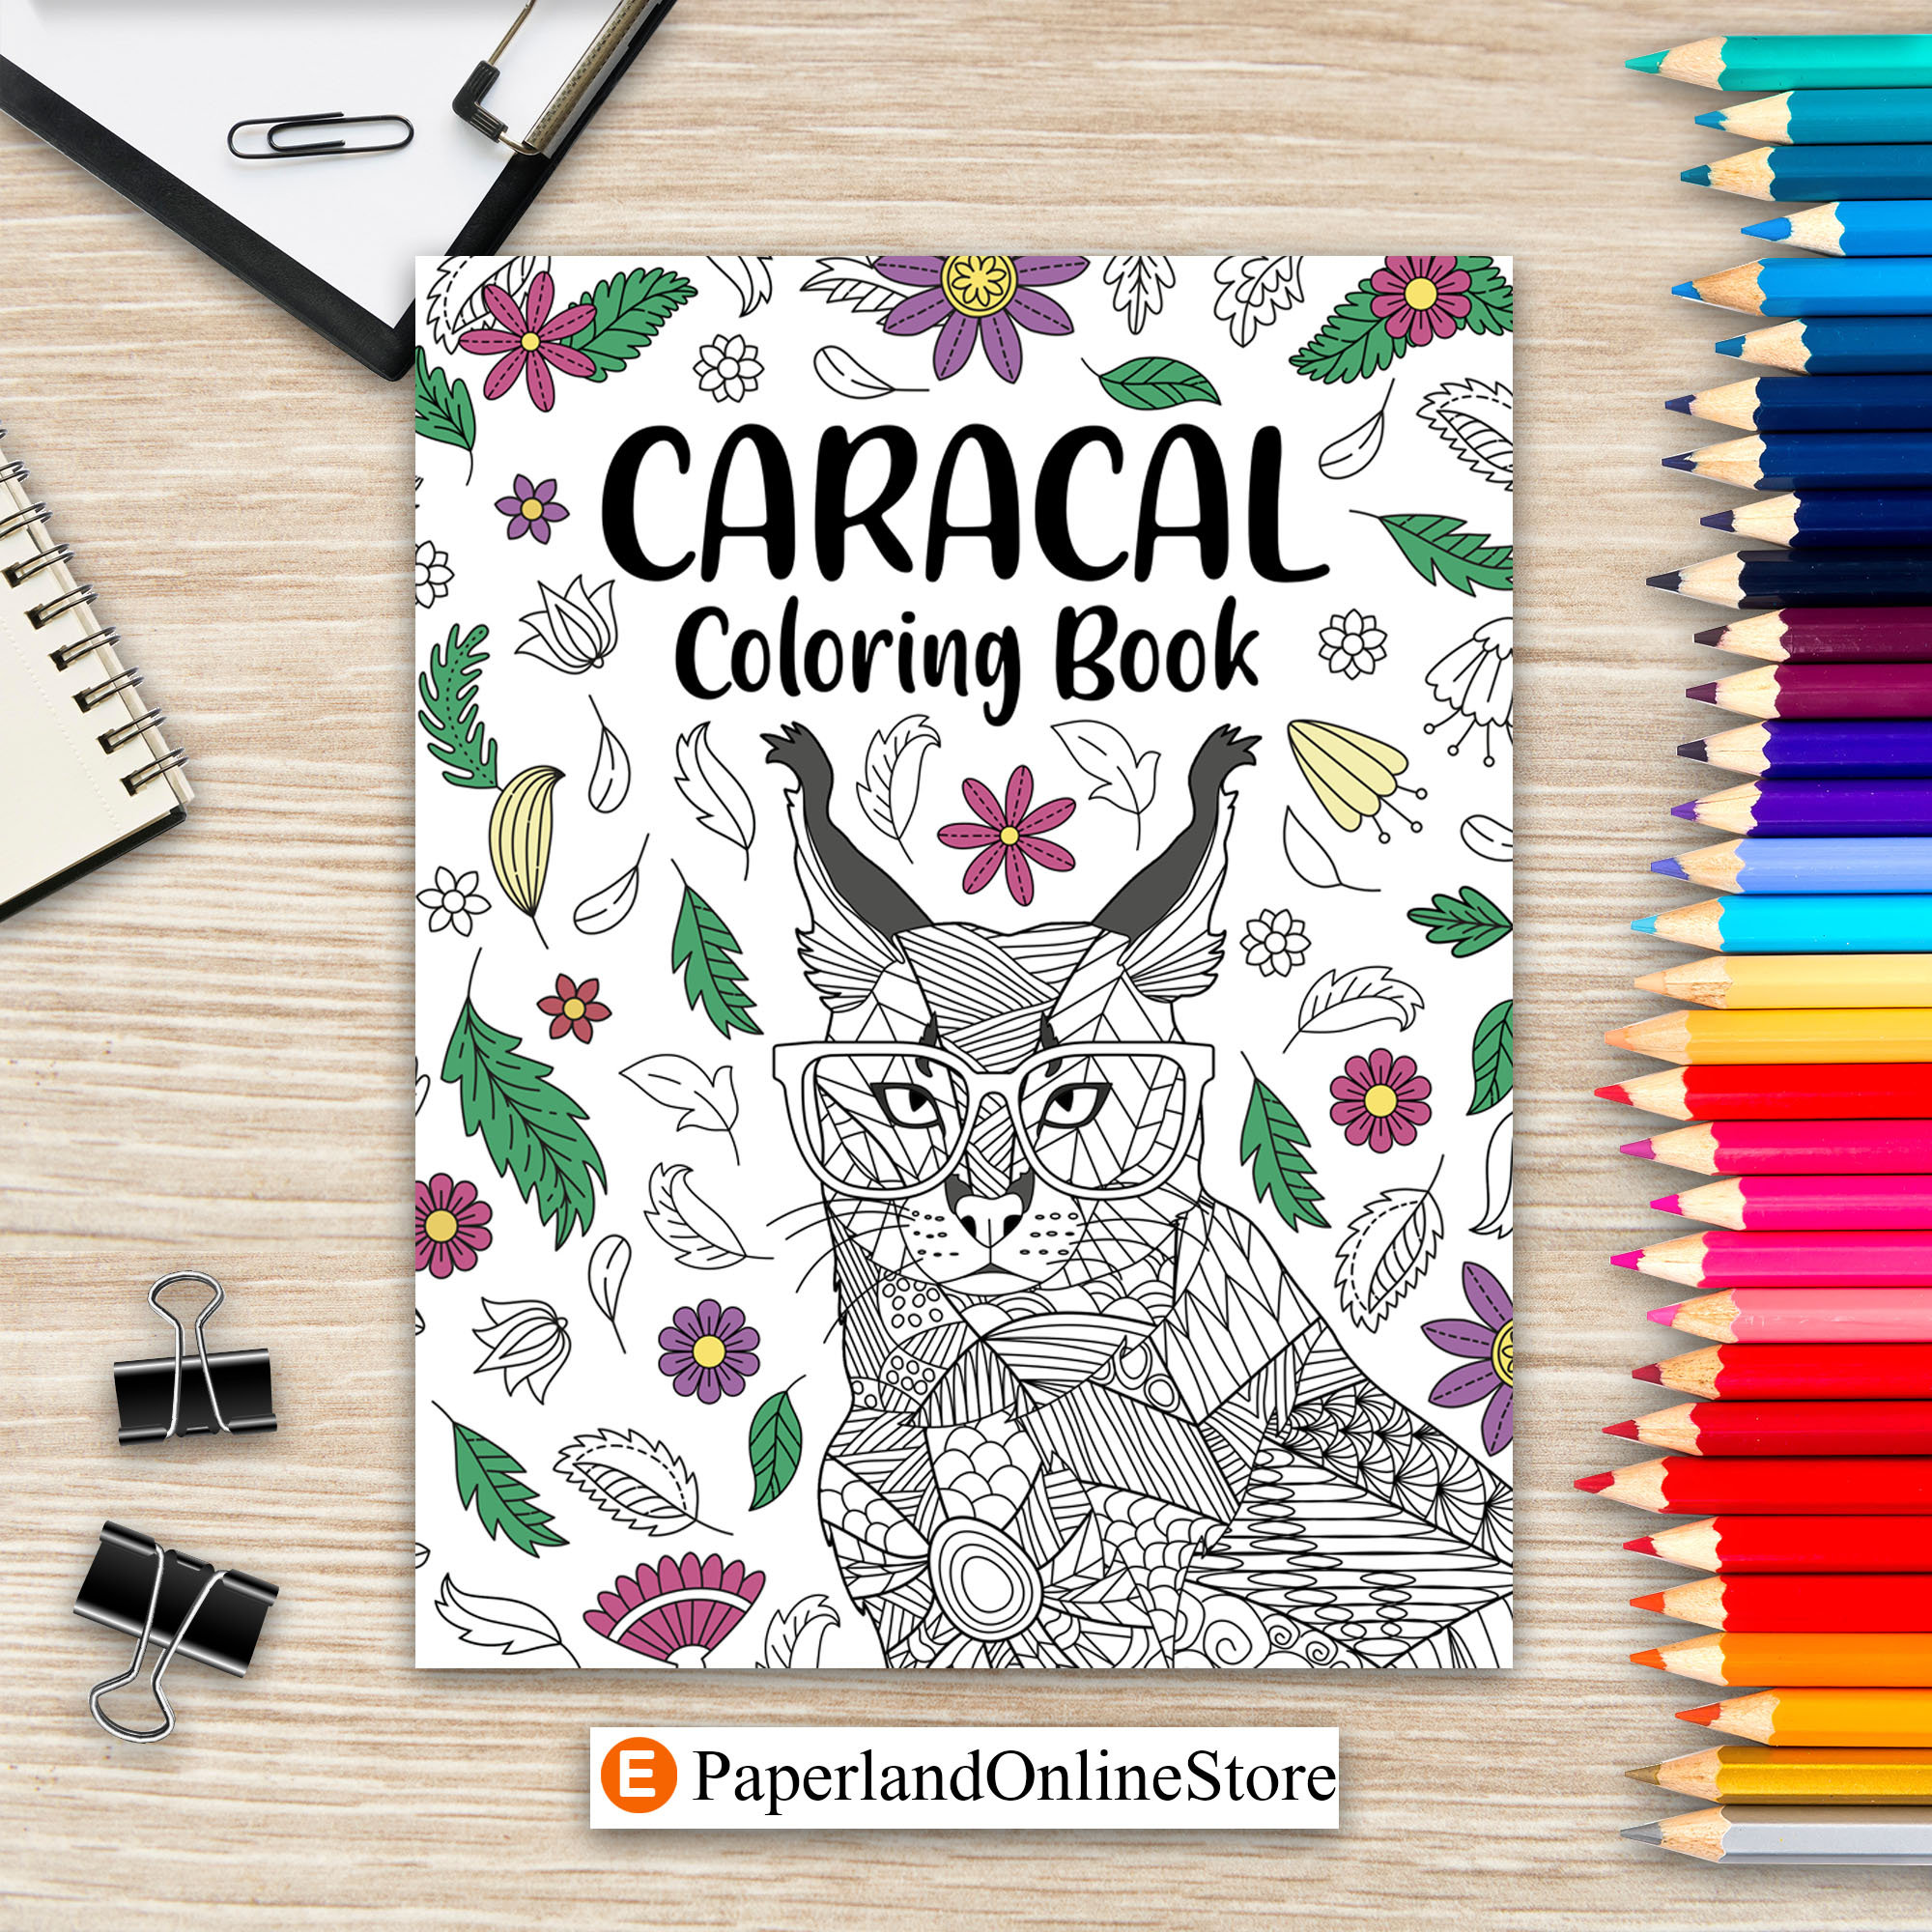 Caracal coloring book mandala crafts hobbies zentangle books funny quotes and freestyle drawing pages egyptian lynx big cat wild